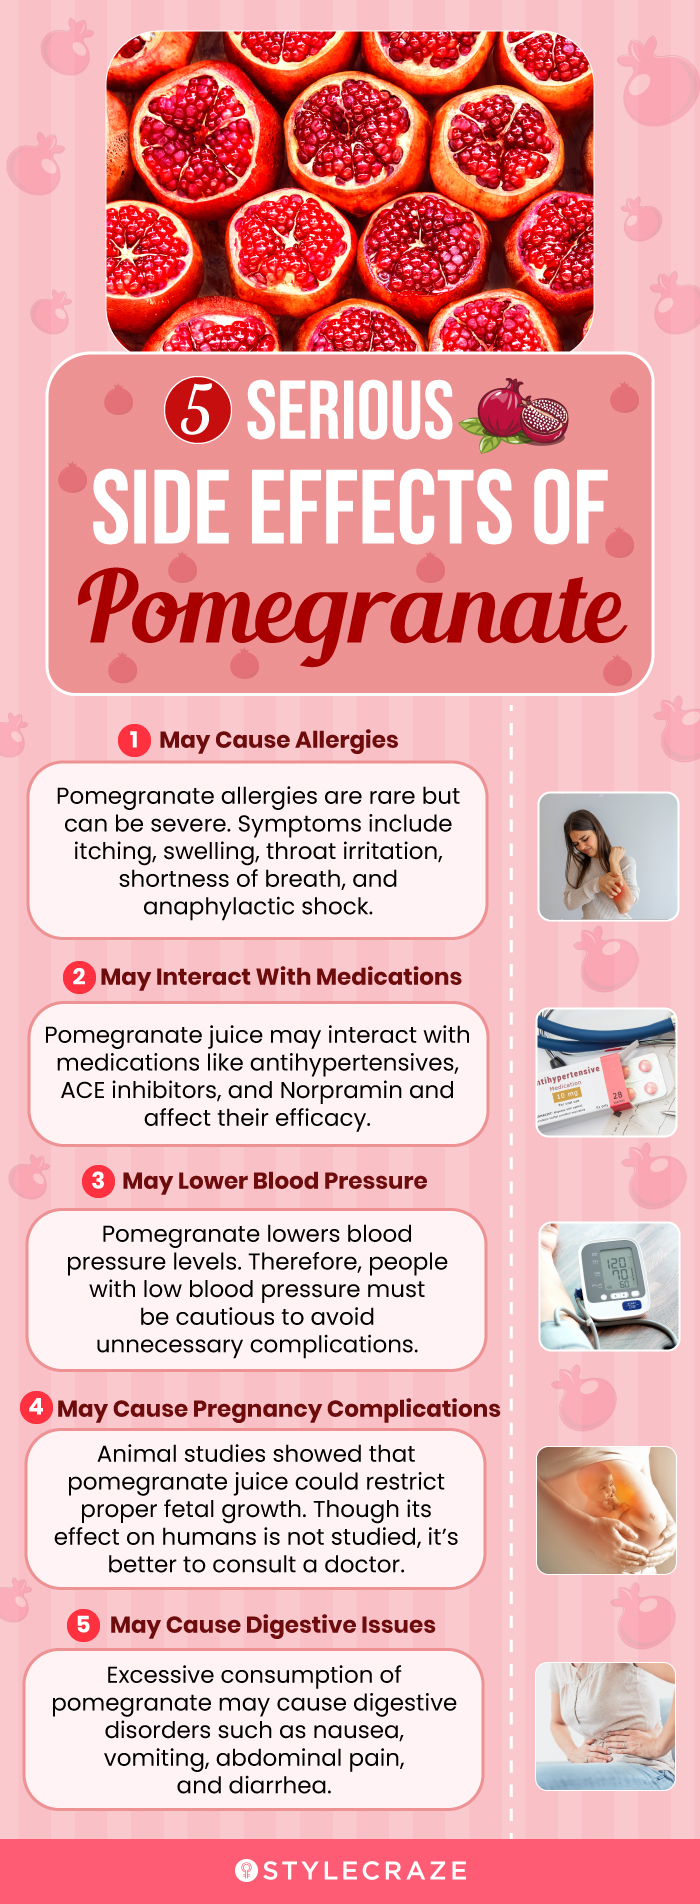 5 serious side effects of pomegranate (infographic)